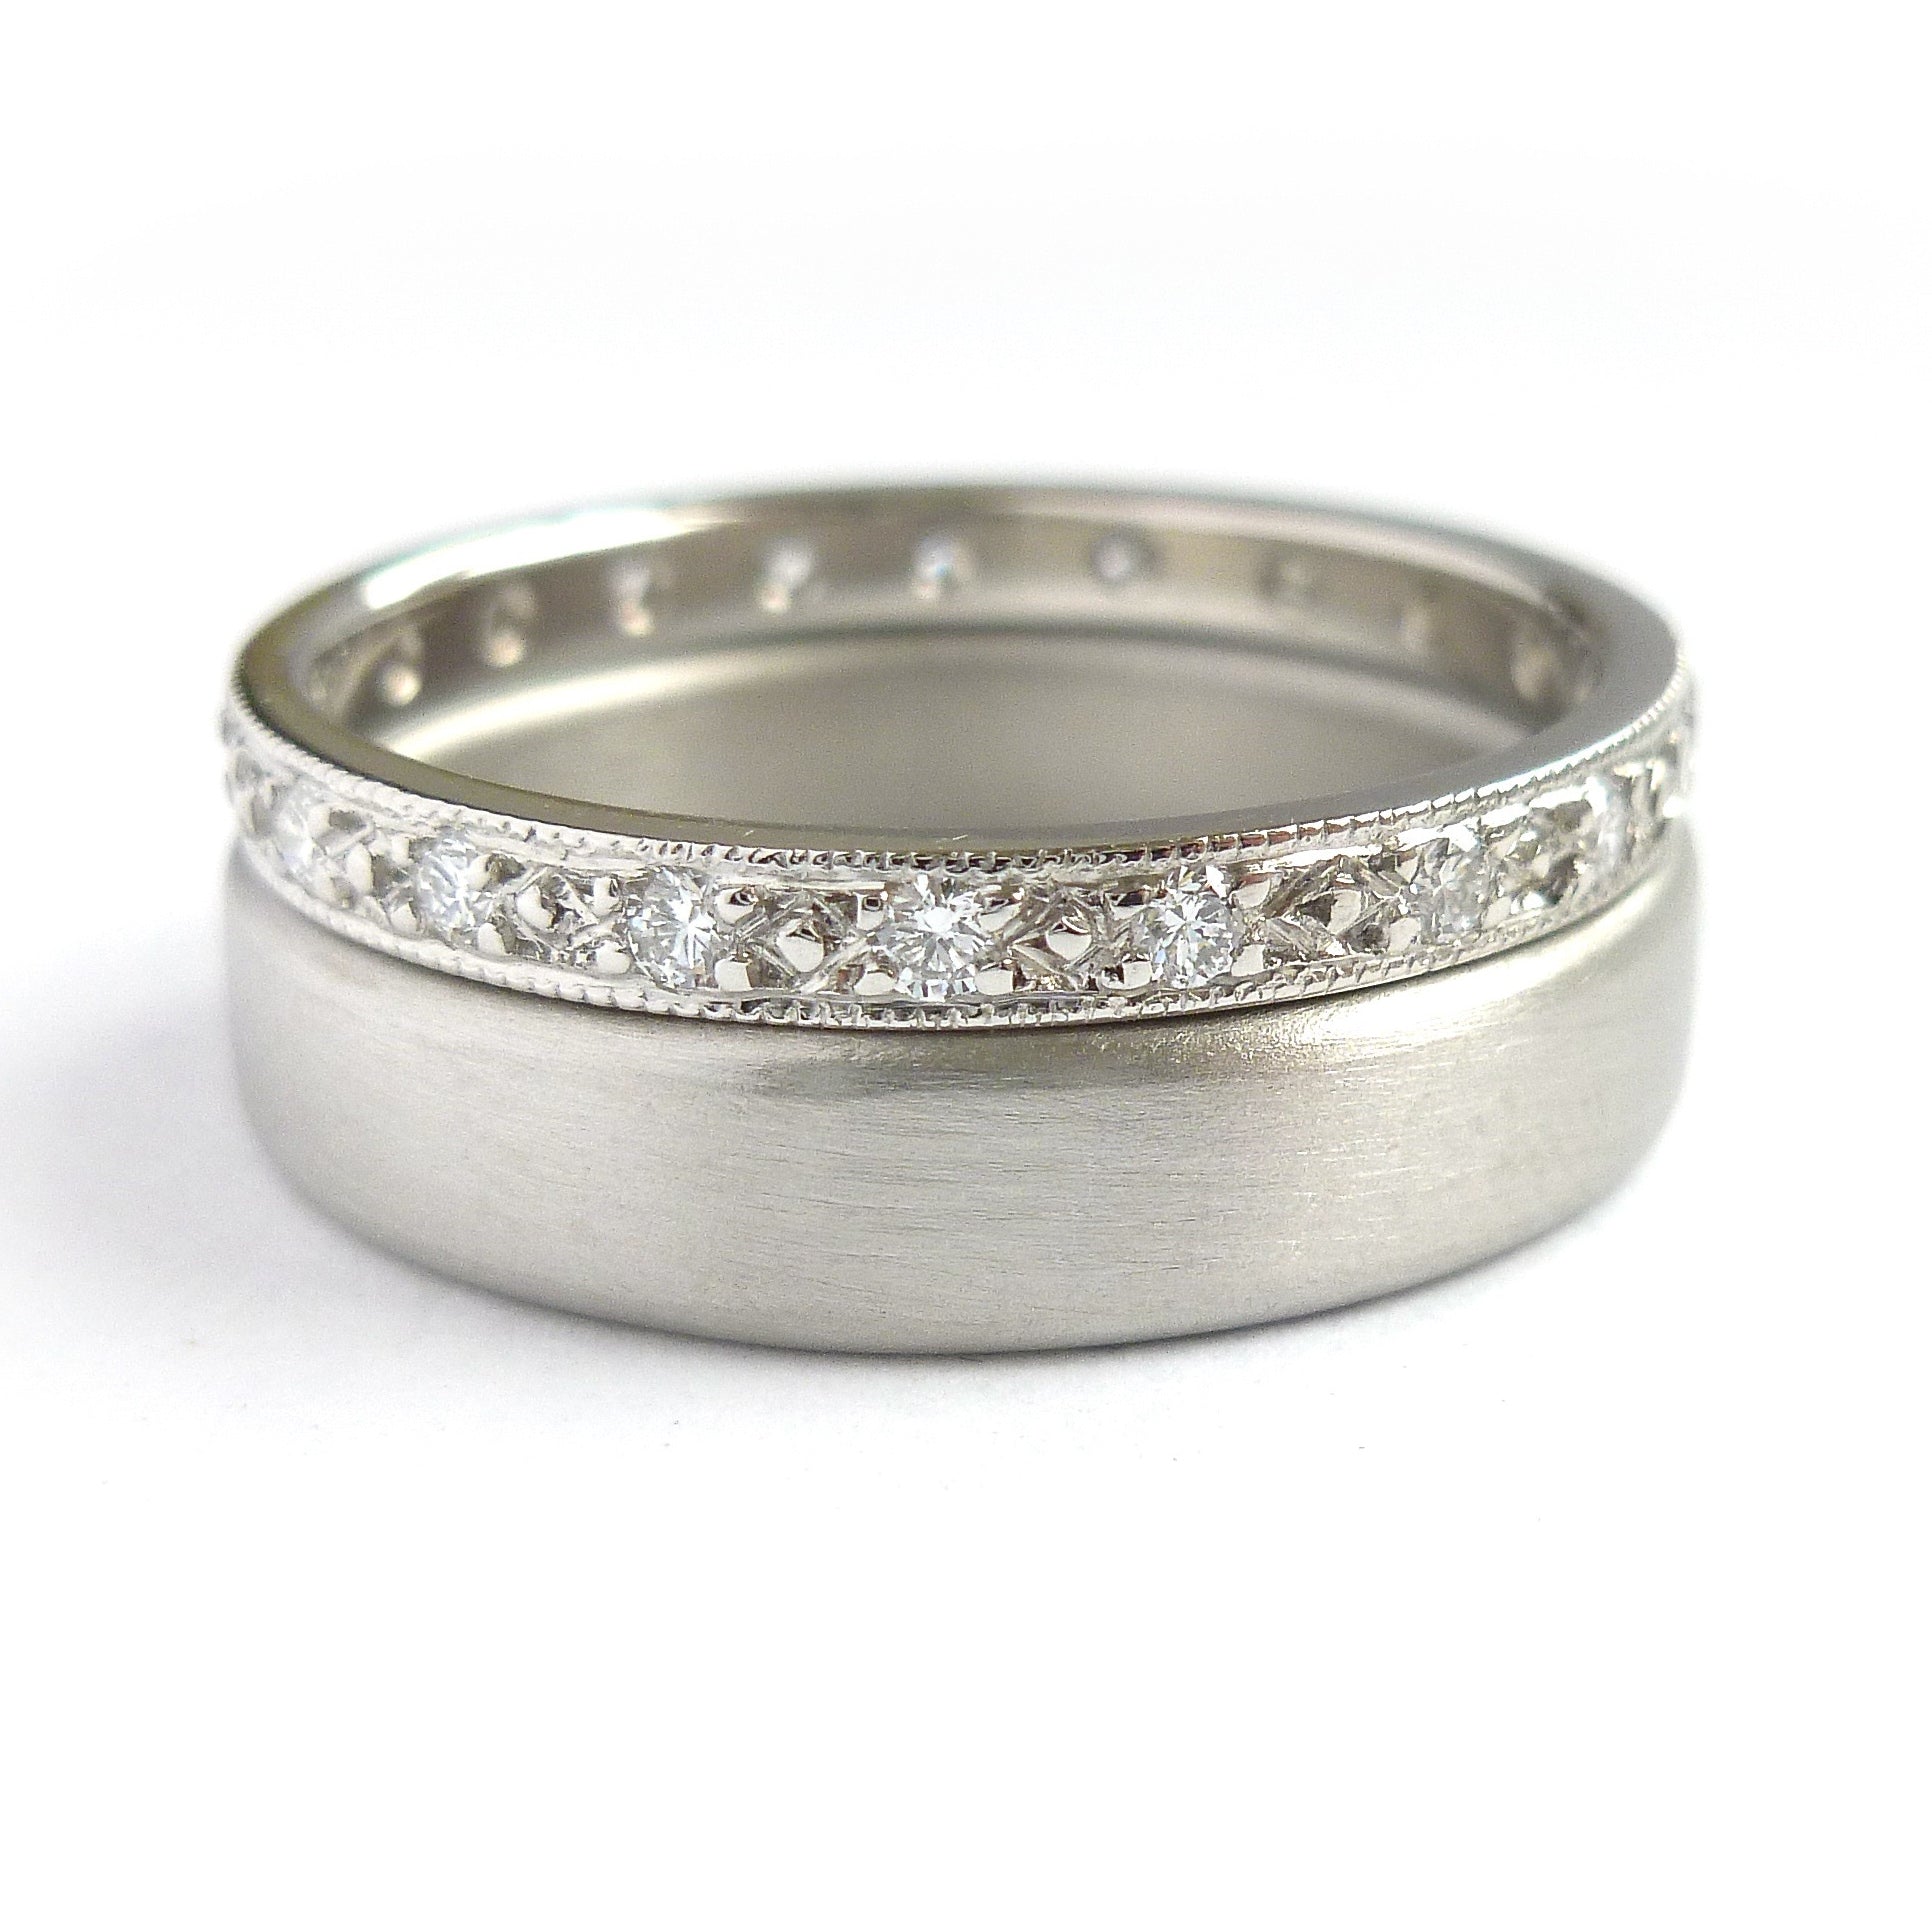 A beautiful classic platinum and diamond wedding or eternity ring handmade by Sue 